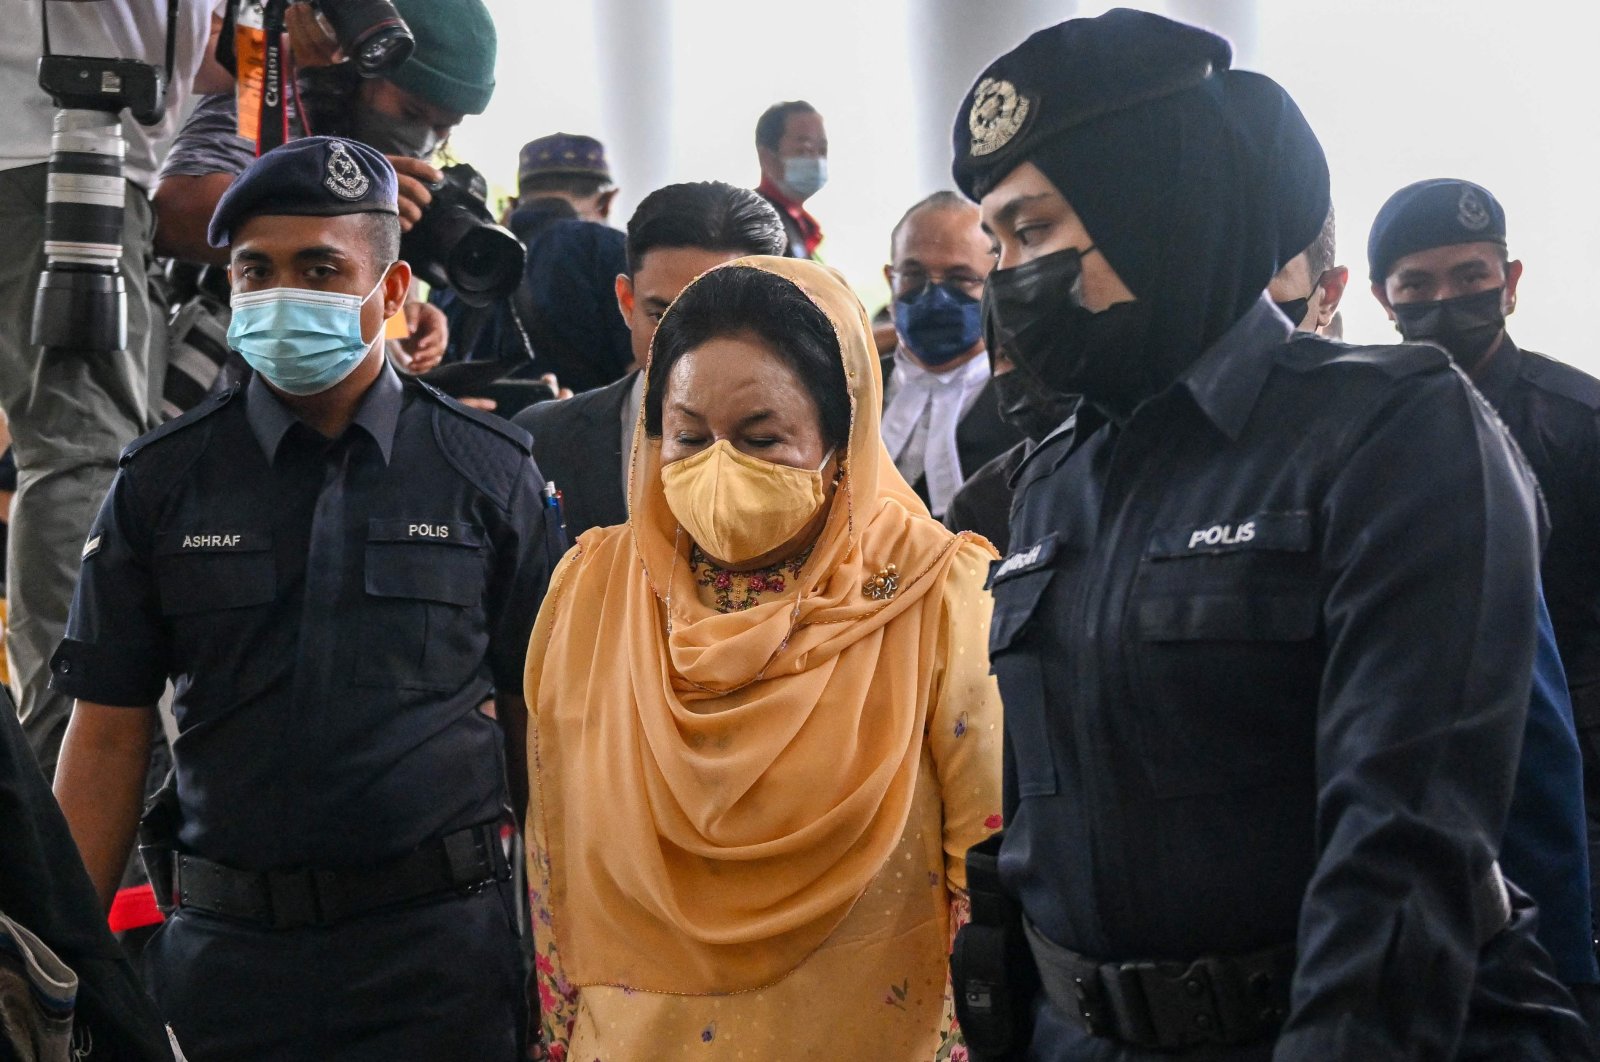 Rosmah Mansor (C), the wife of Malaysian ex-premier Najib Razak, arrives for the verdict in her corruption trial at the high court in Kuala Lumpur, Malaysia, Sept. 1, 2022. (AFP Photo)